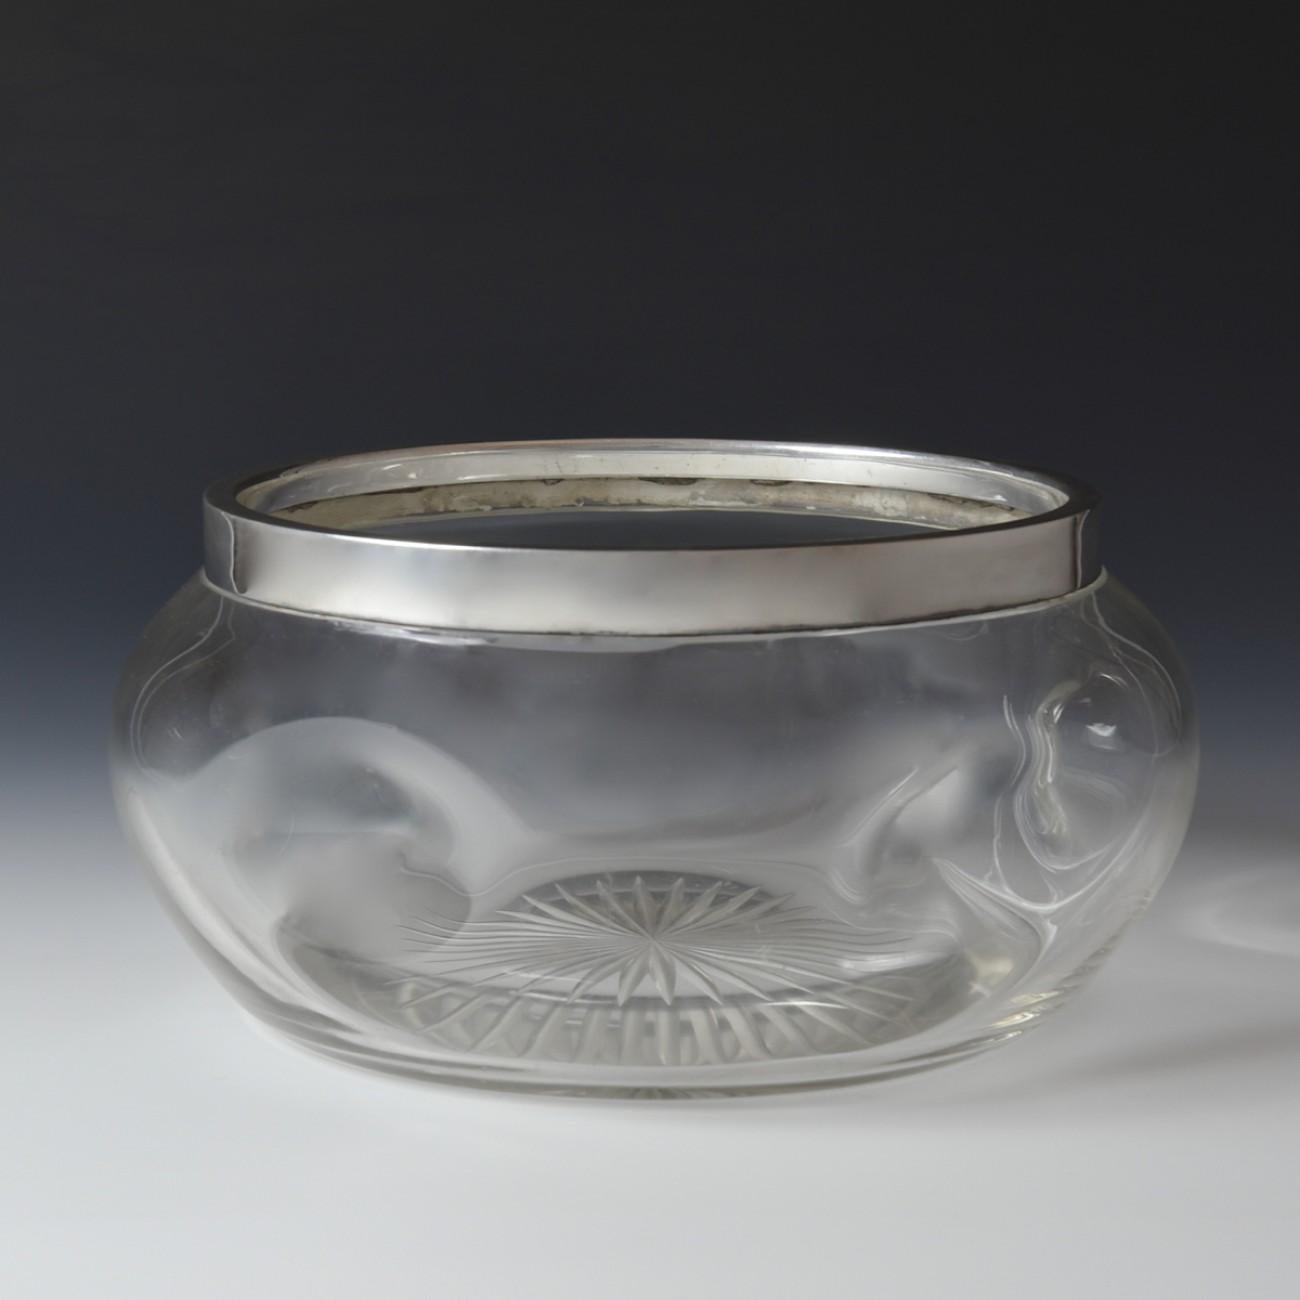 An unusual dimpled glass bowl with star cut to base and Sterling silver collar, hallmarked Sheffield 1903.

Dimensions: 23 cm/9 inches (diameter) x 11 cm/4¼ inches (height)

Bentleys are Members of LAPADA, the London and Provincial Antique Dealers